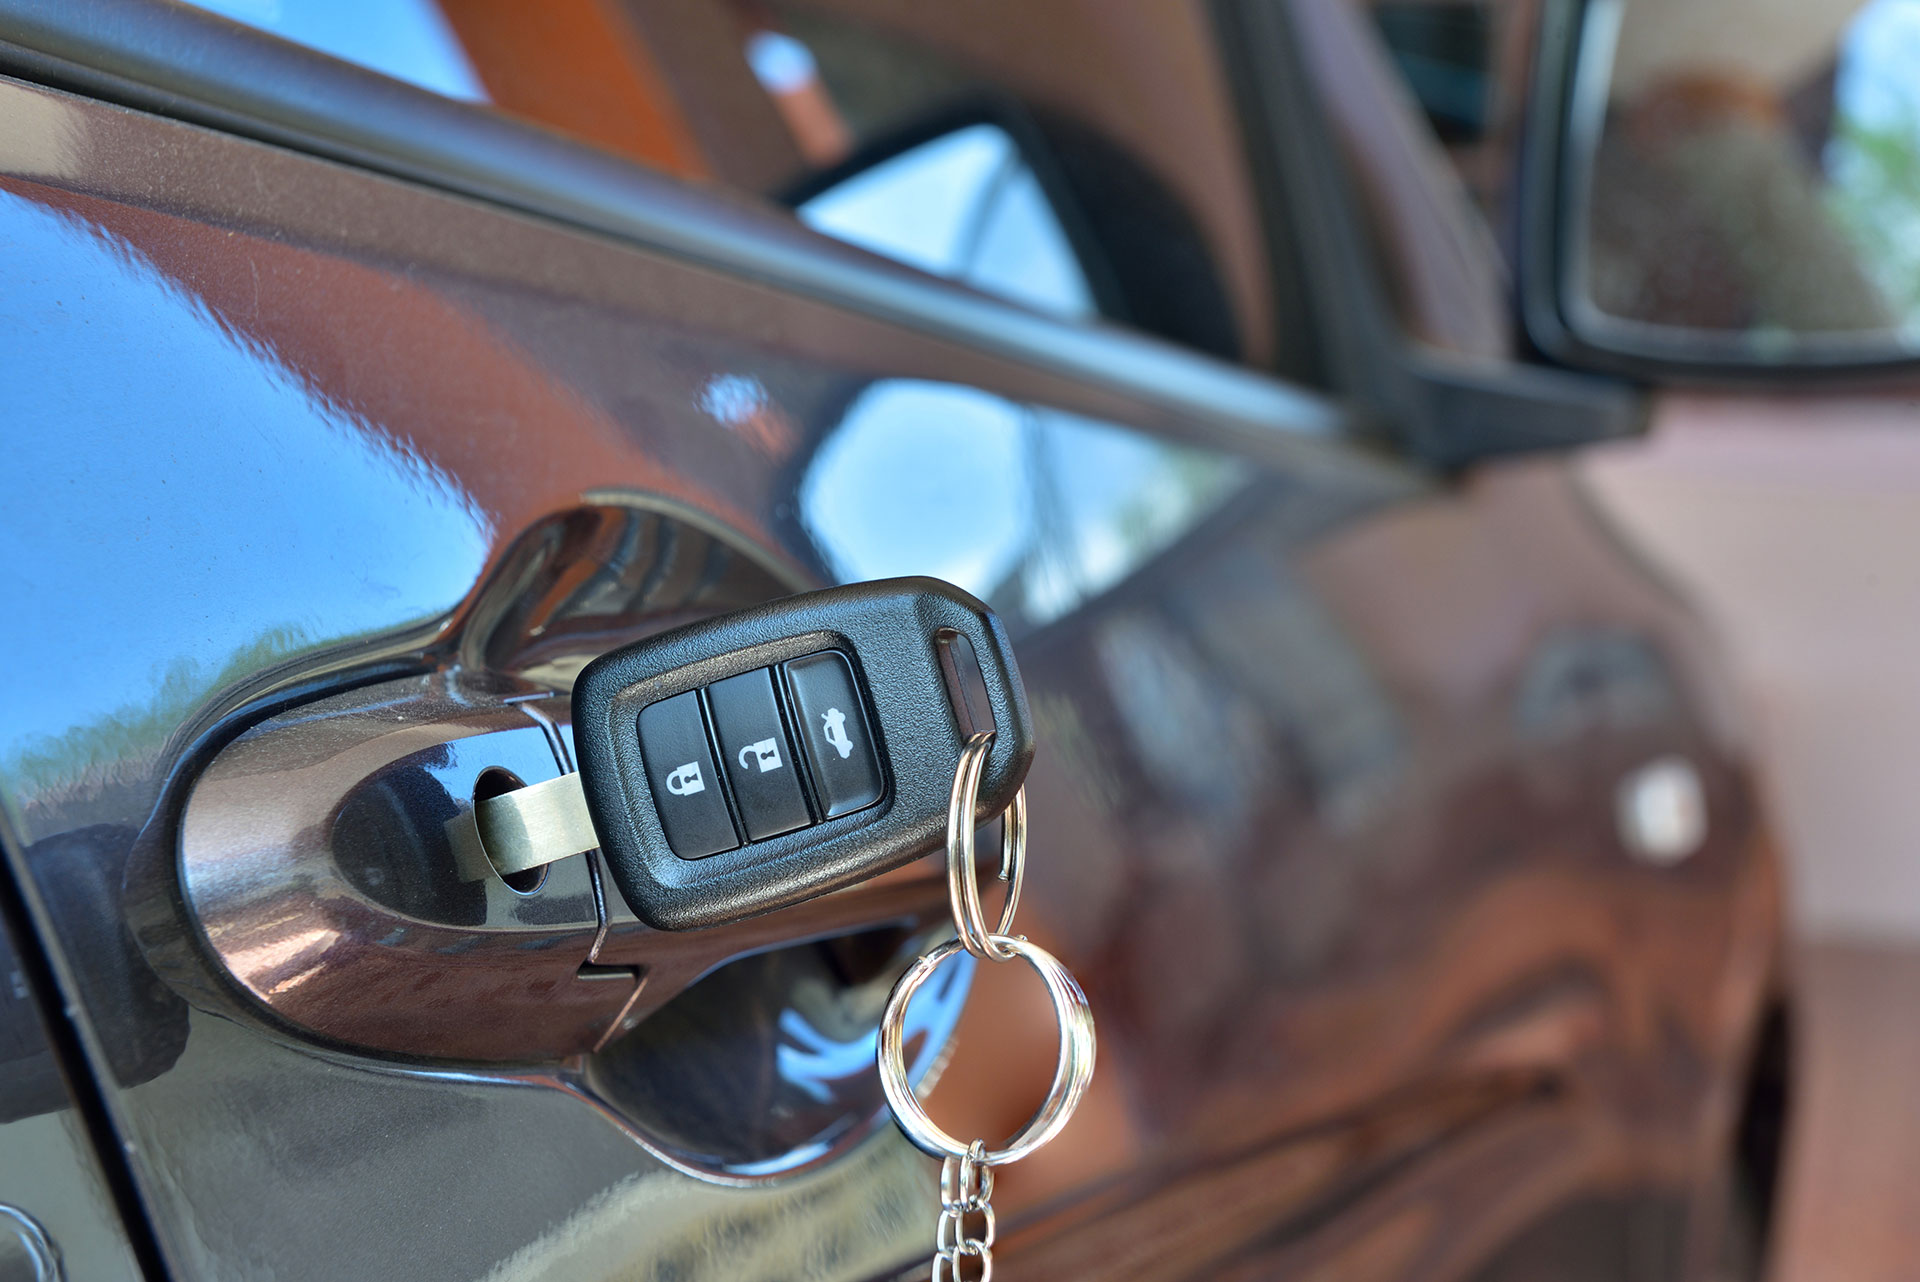 Locksmith Services for Your Car: What You Need to Know